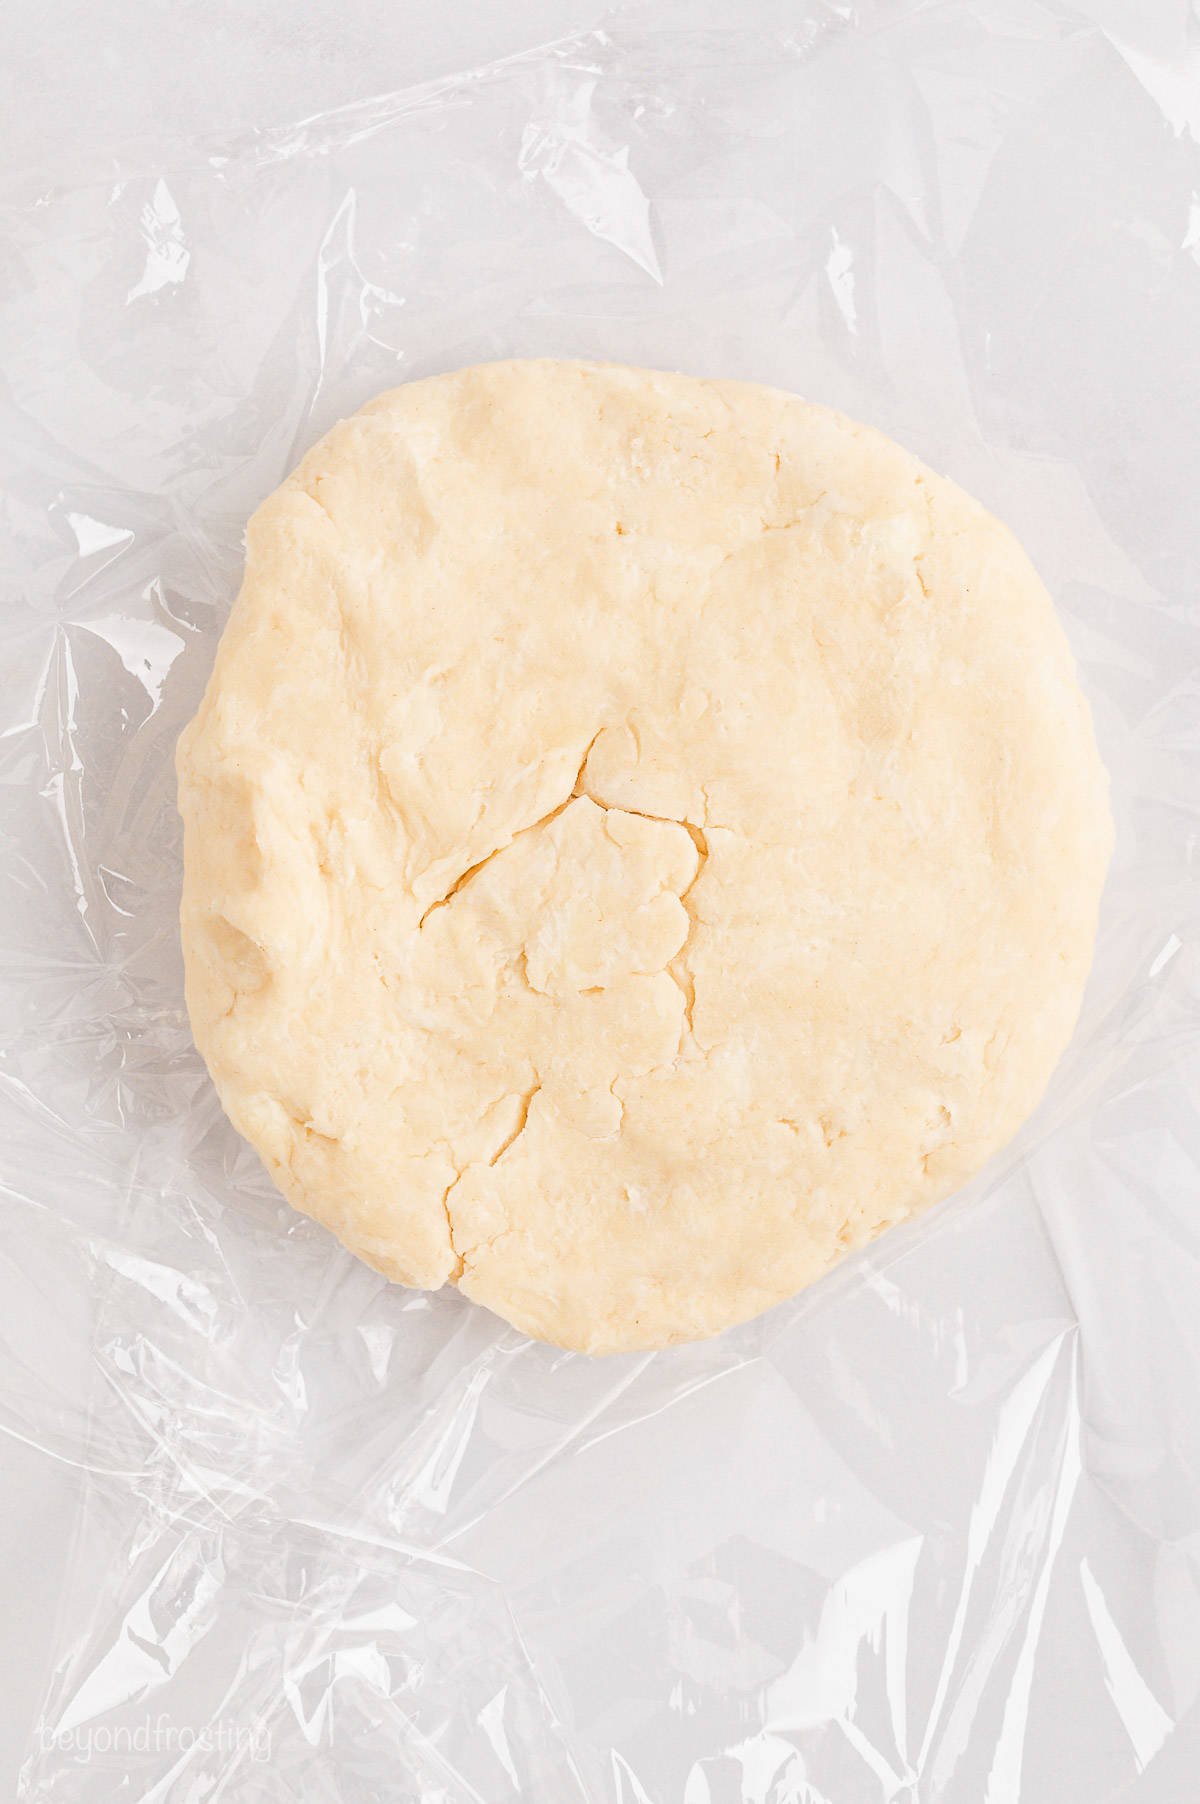 Pie dough shaped into a large disc on a floured surface.